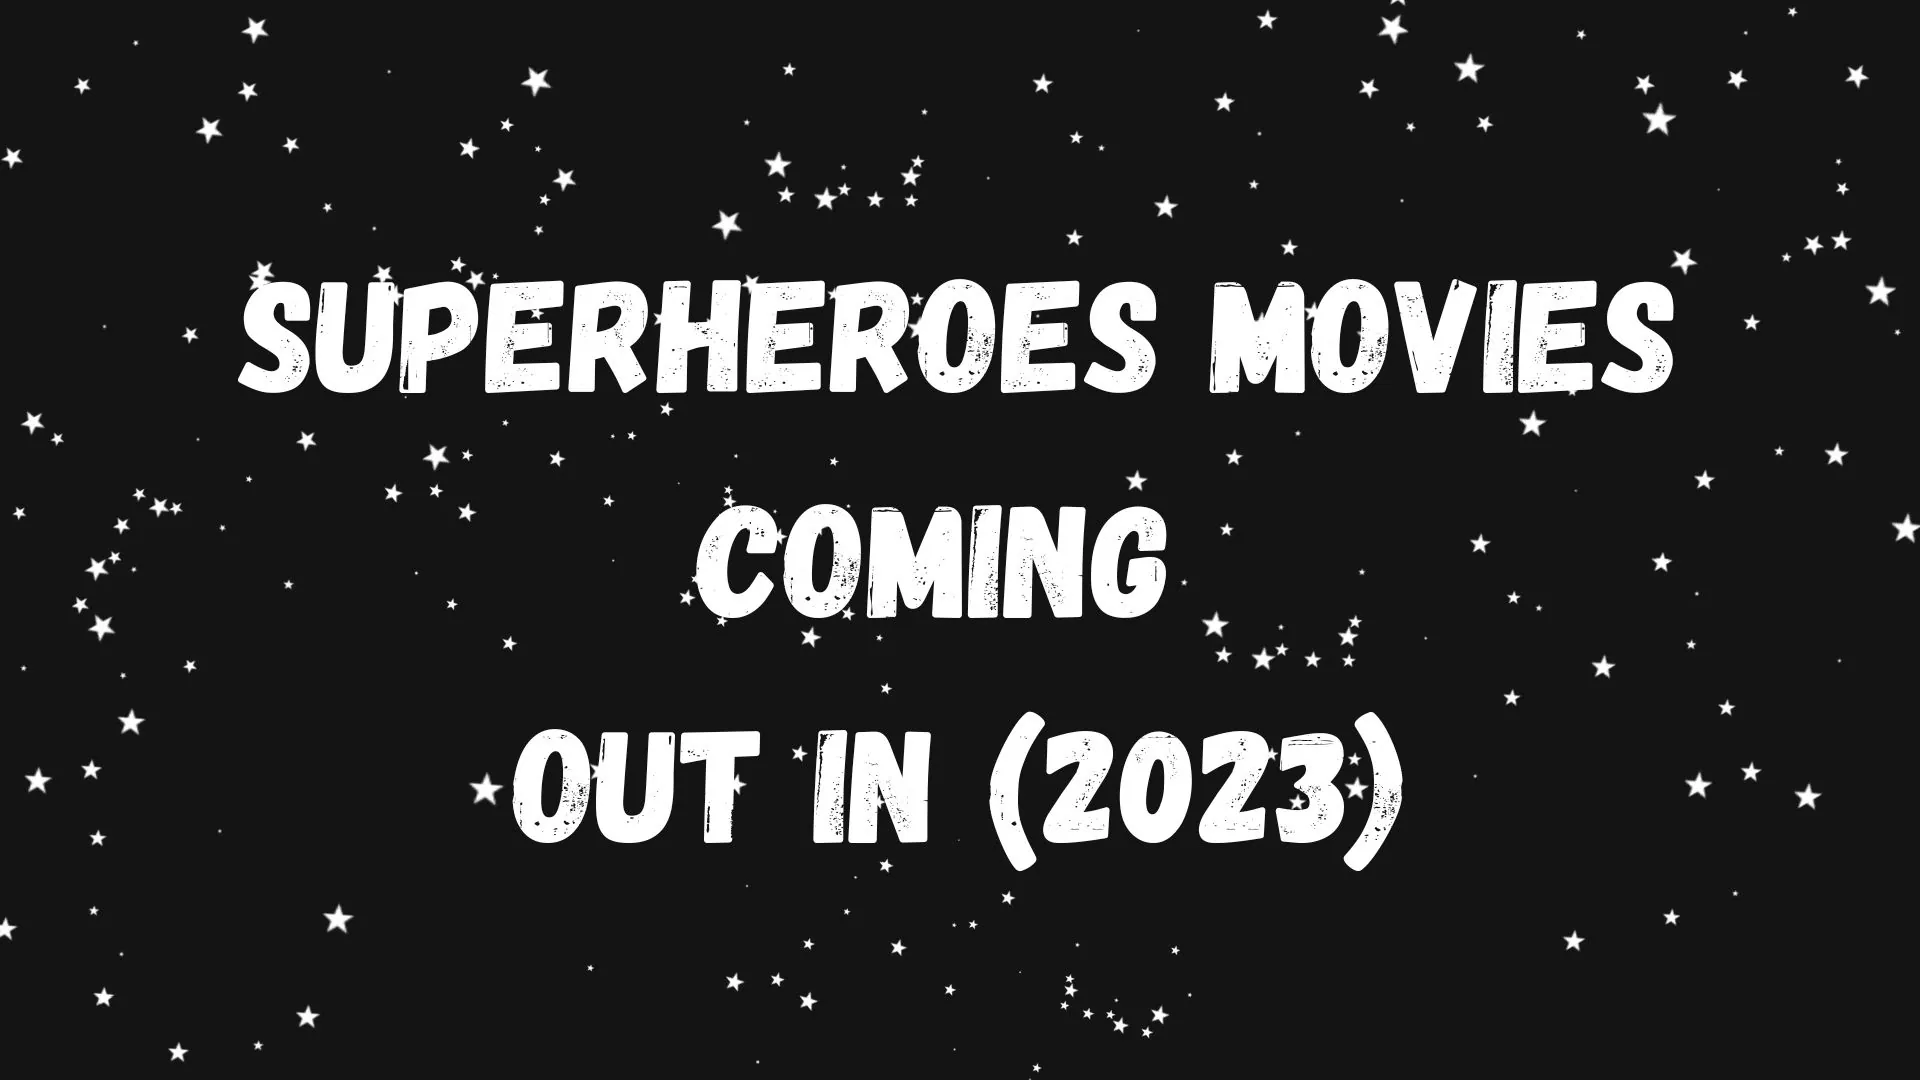 Superheroes Movies Coming Out In (2023)